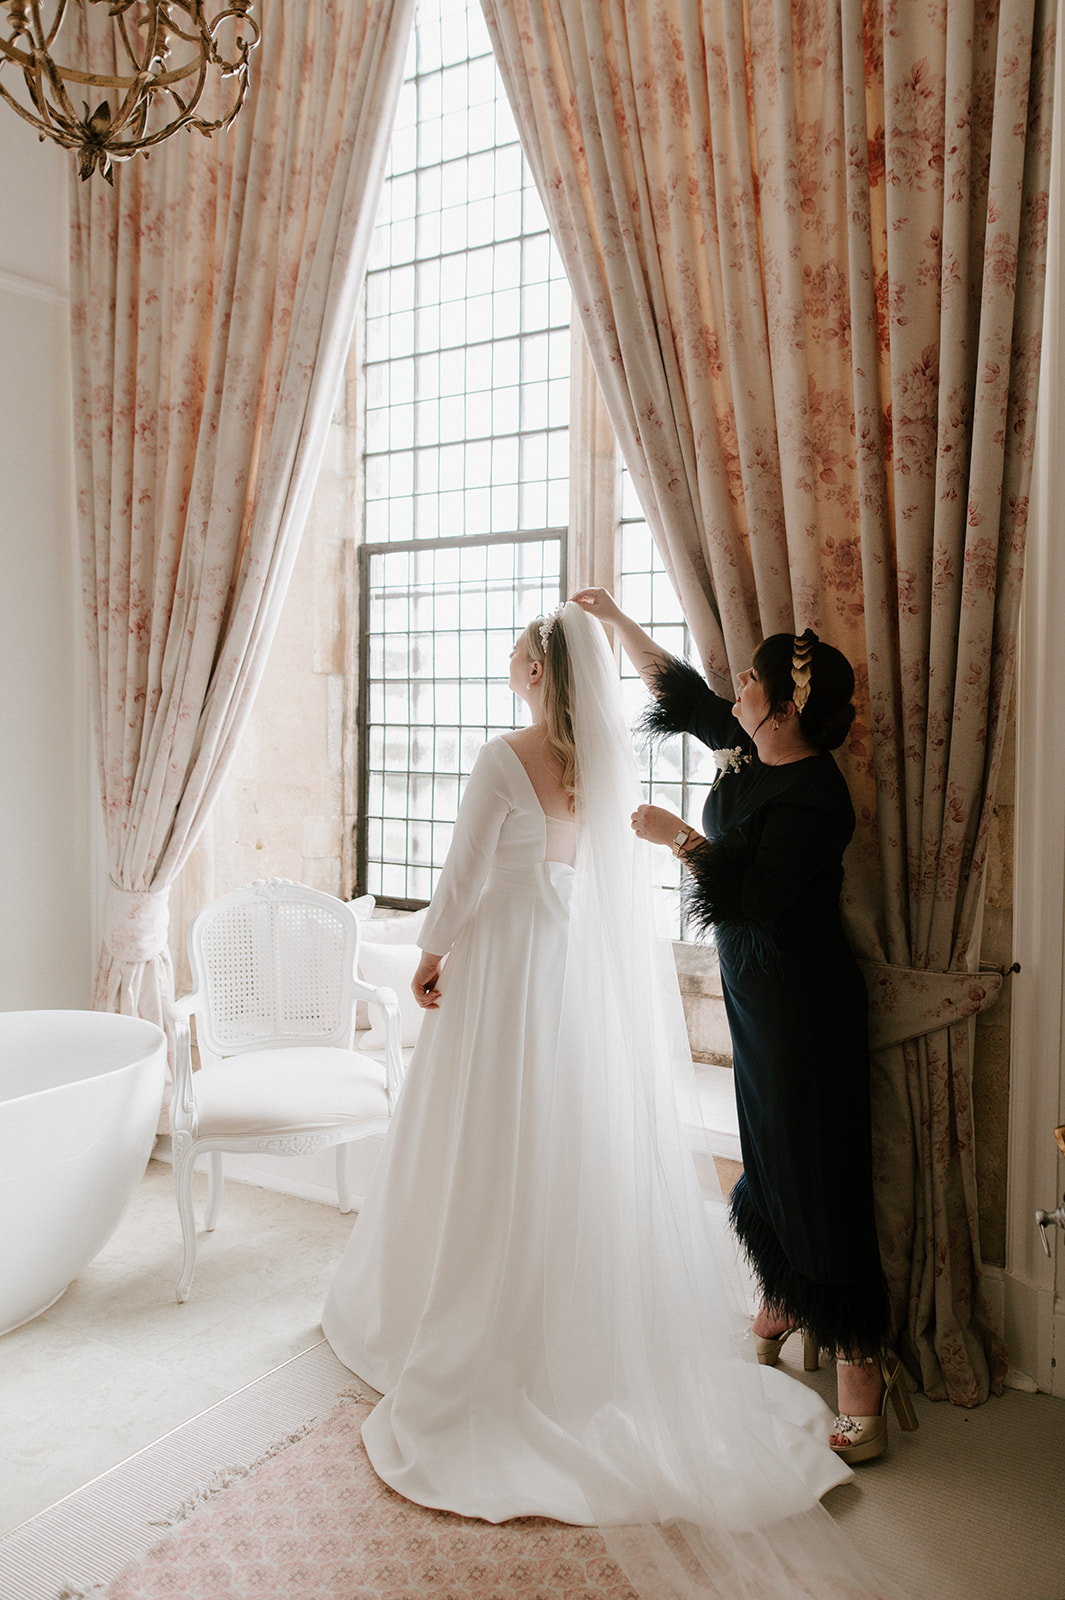 brides sister putting in veil in bridal suite at butley priory